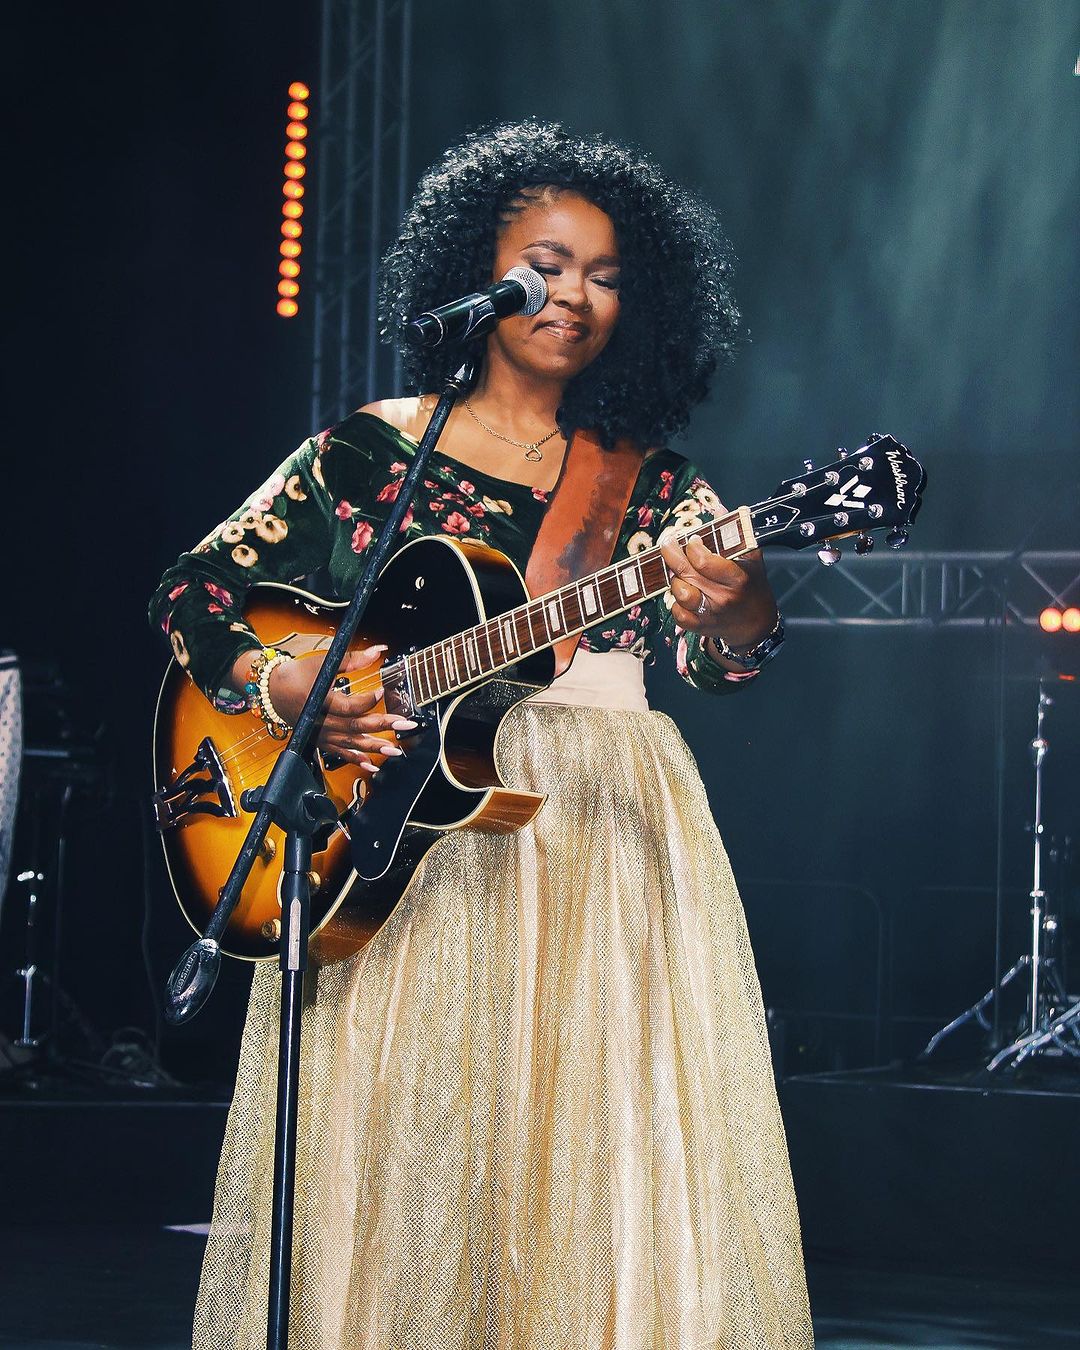 Zahara Biography: Real Name, Age, Songs, Net Worth, Husband, Instagram, Meaning, Pictures